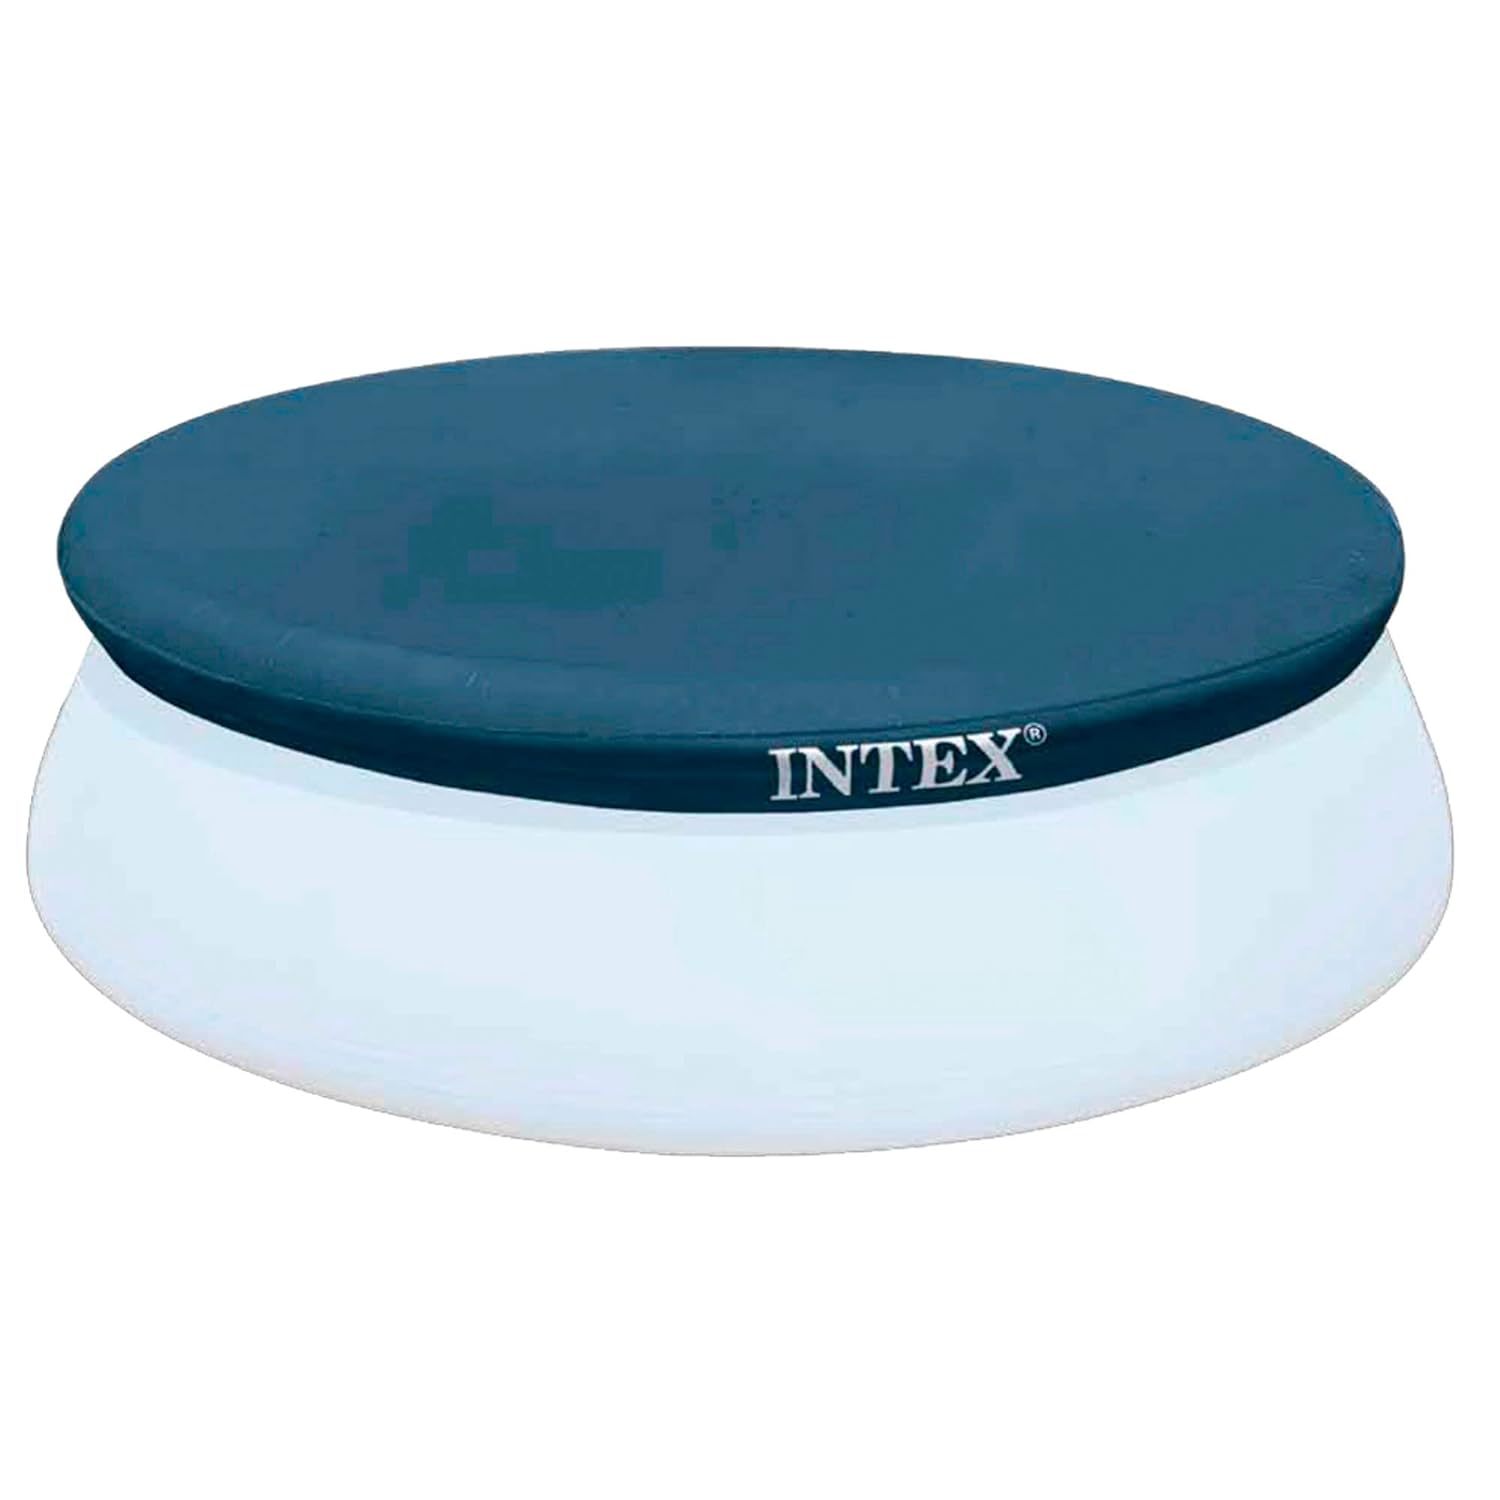 Primary image for INTEX 28020E Intex 8-Foot Round Easy Set Pool Cover with rope tie and drain hole